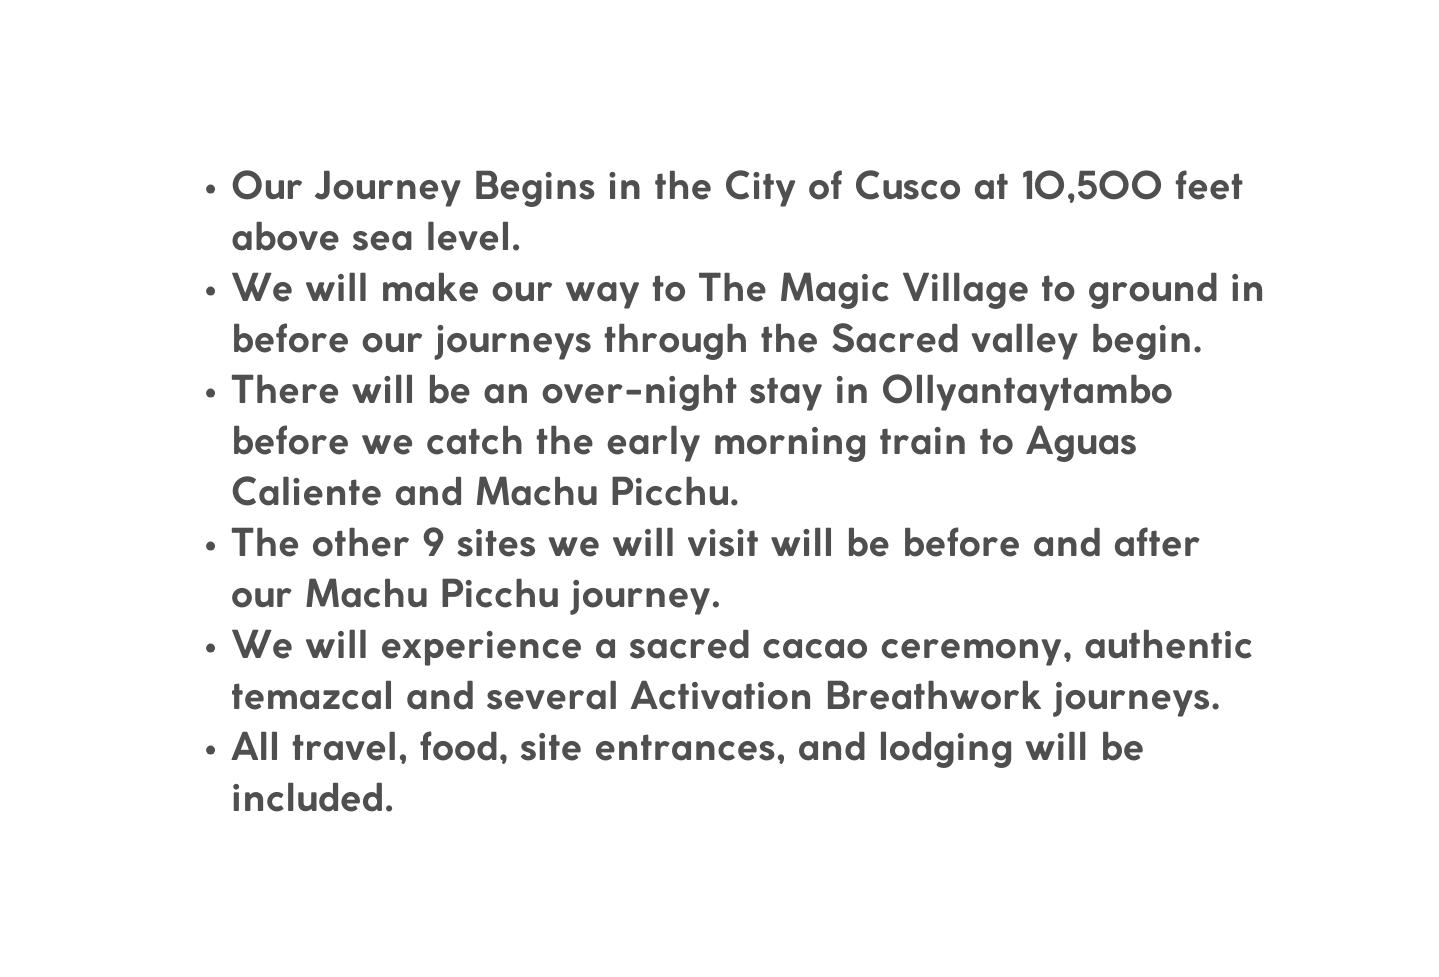 Our Journey Begins in the City of Cusco at 10 500 feet above sea level We will make our way to The Magic Village to ground in before our journeys through the Sacred valley begin There will be an over night stay in Ollyantaytambo before we catch the early morning train to Aguas Caliente and Machu Picchu The other 9 sites we will visit will be before and after our Machu Picchu journey We will experience a sacred cacao ceremony authentic temazcal and several Activation Breathwork journeys All travel food site entrances and lodging will be included